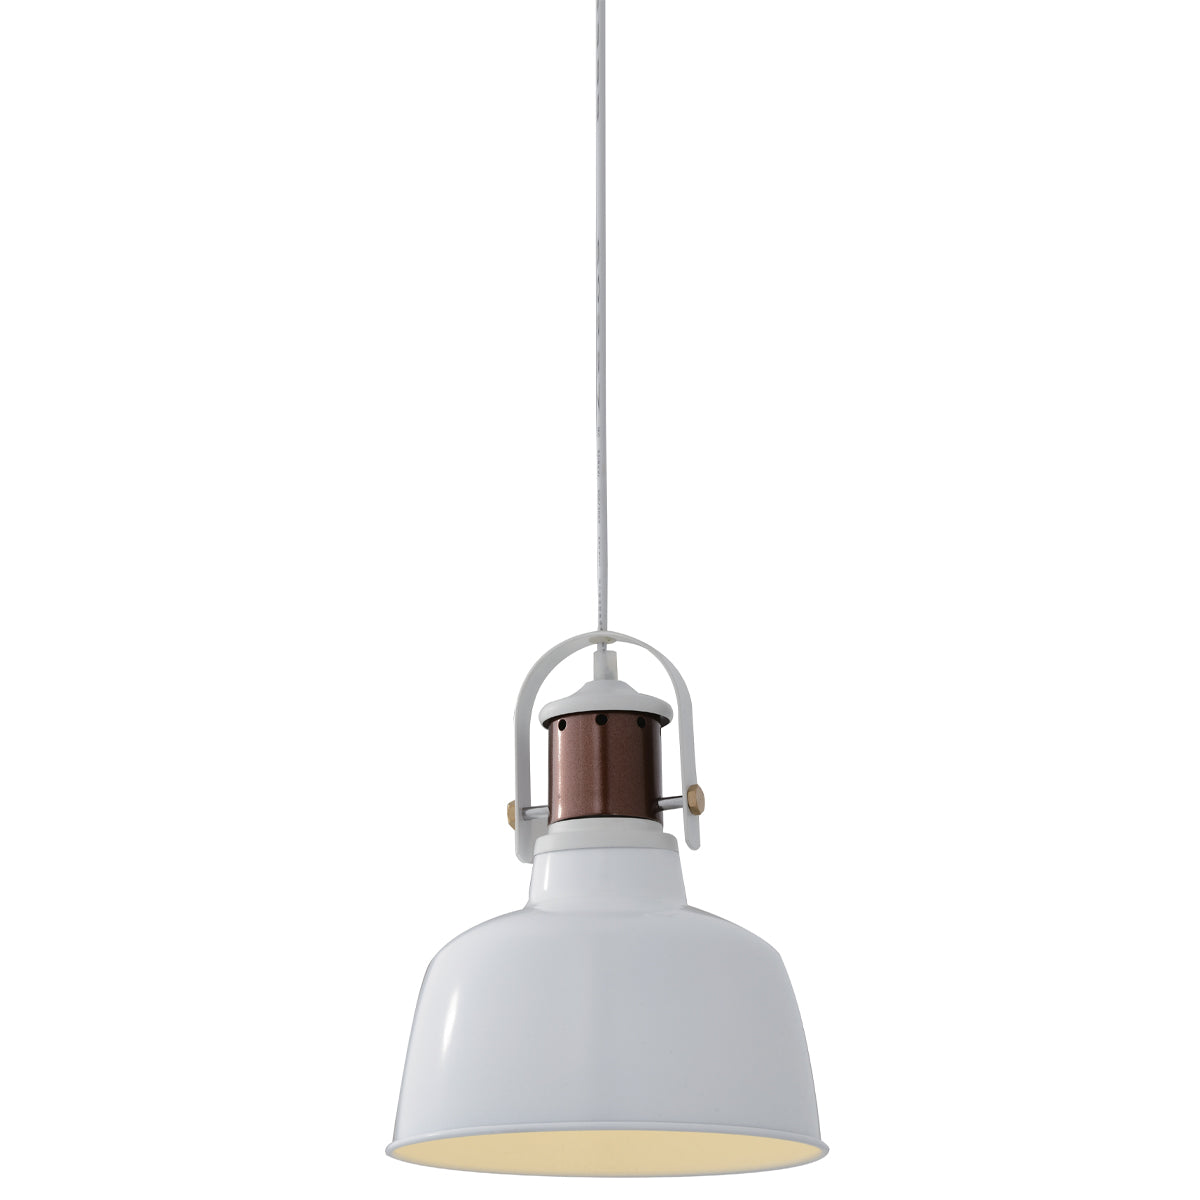 Our Marnie white adjustable dome ceiling pendant light is the perfect addition to any room to add a modern and industrial focal point. The industrial style of this light brings a bright and elegant aesthetic to your interior as the dome shape creates a modern and contemporary appearance. Would look great above a kitchen island or dining table. The height can be adjusted at the time of fitting.